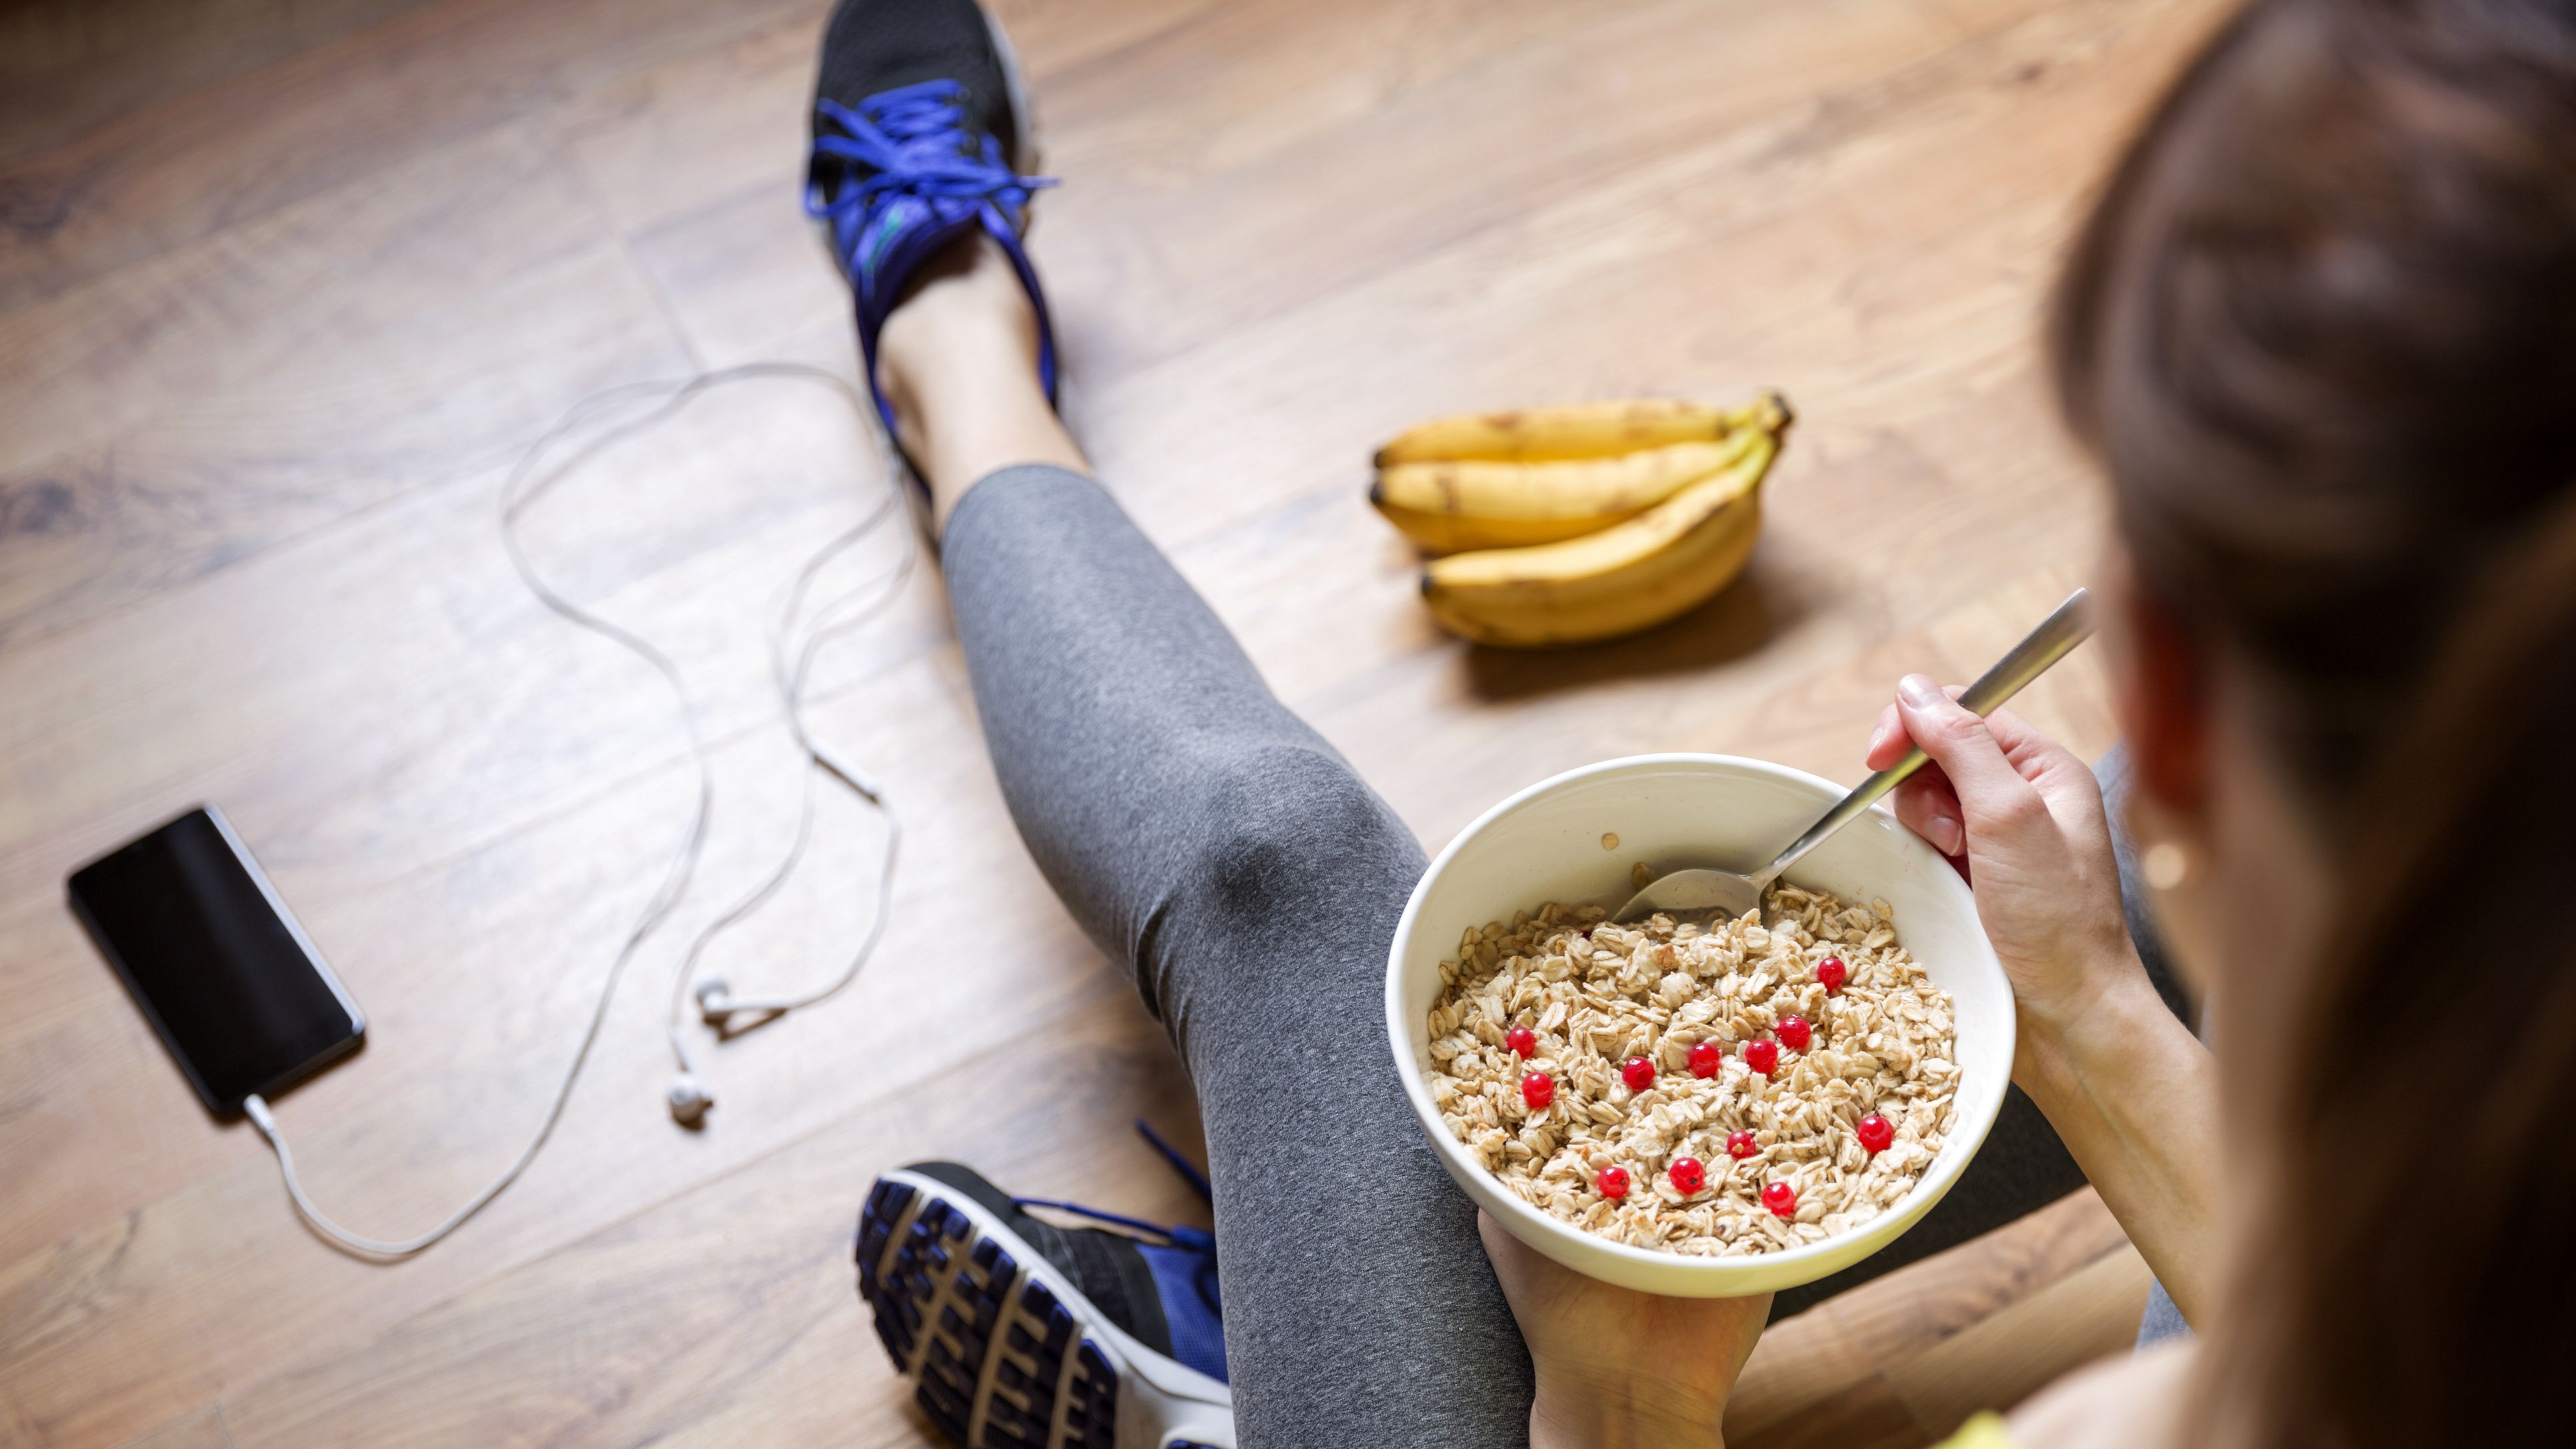 39 Best Pre-Workout Snacks - What to Eat Before Every Workout